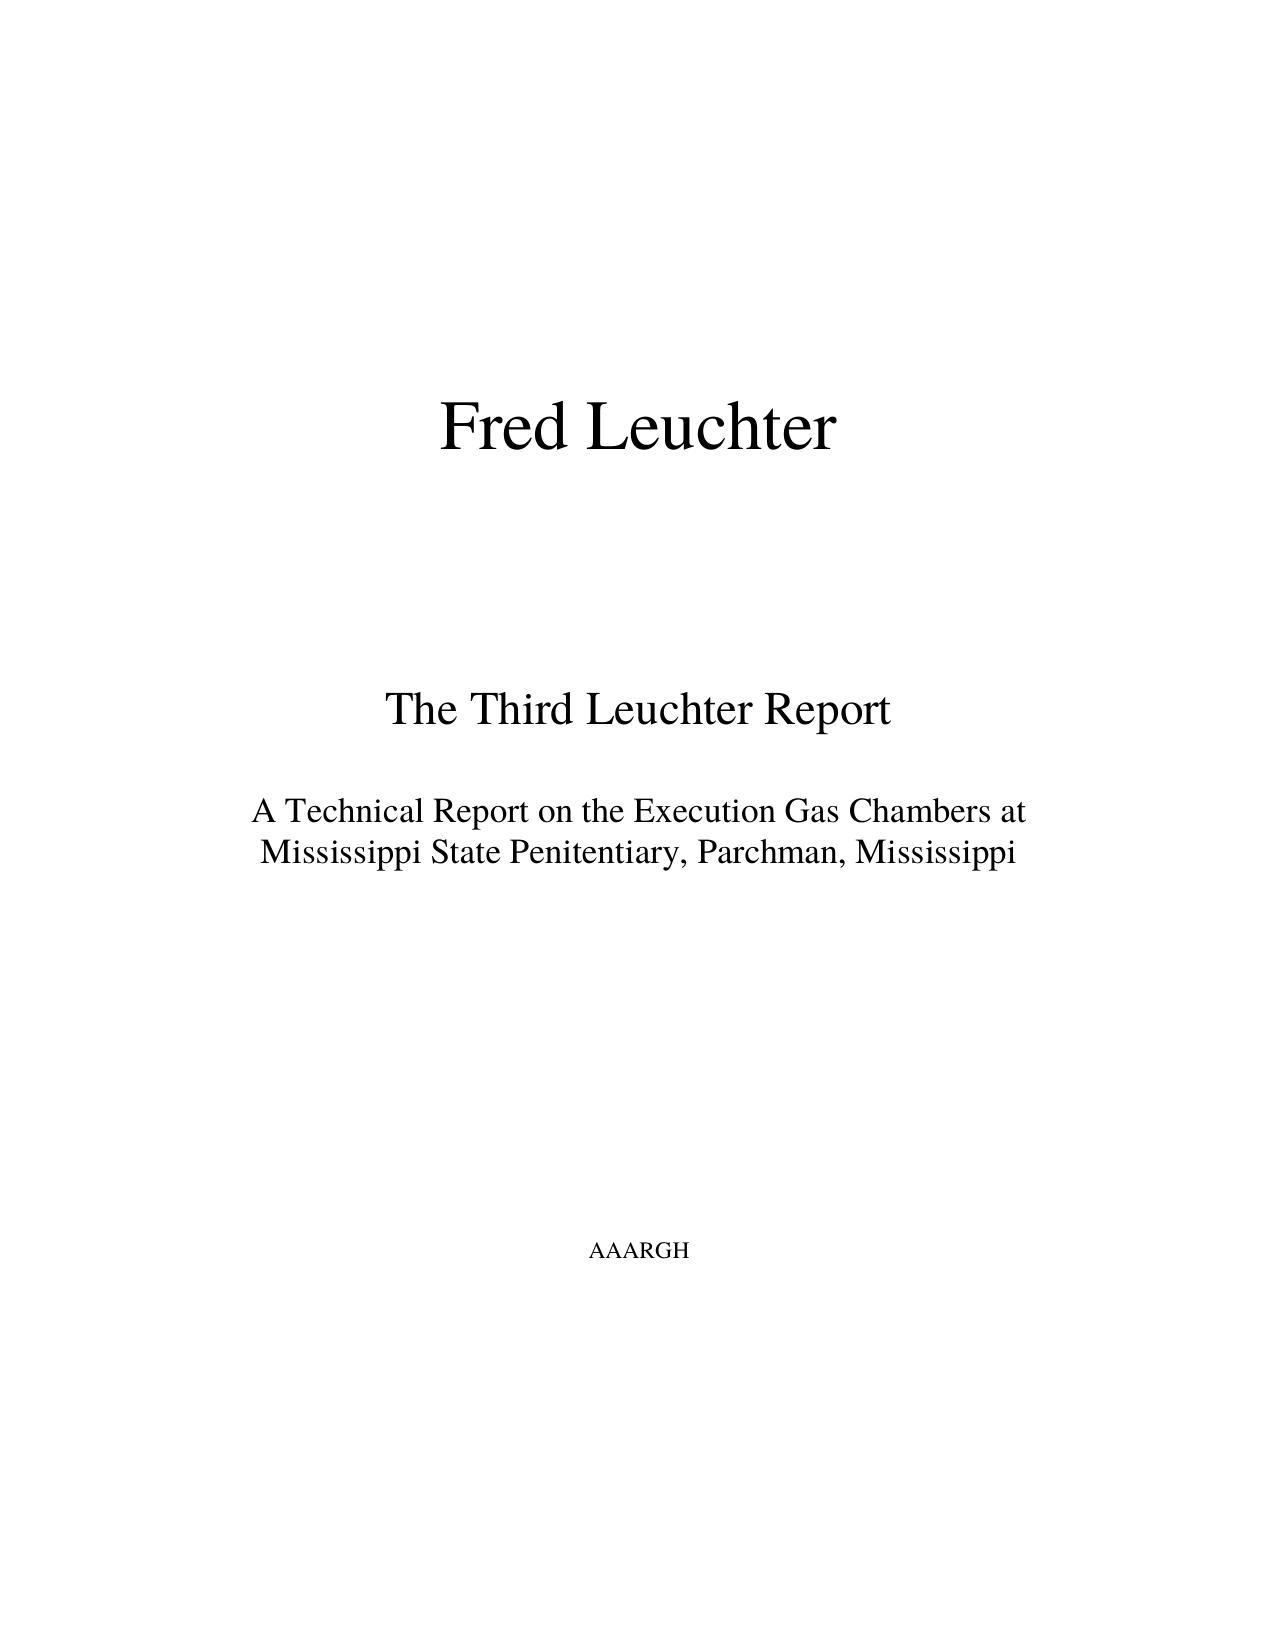 The Third Leuchter Report by Fred Leuchter